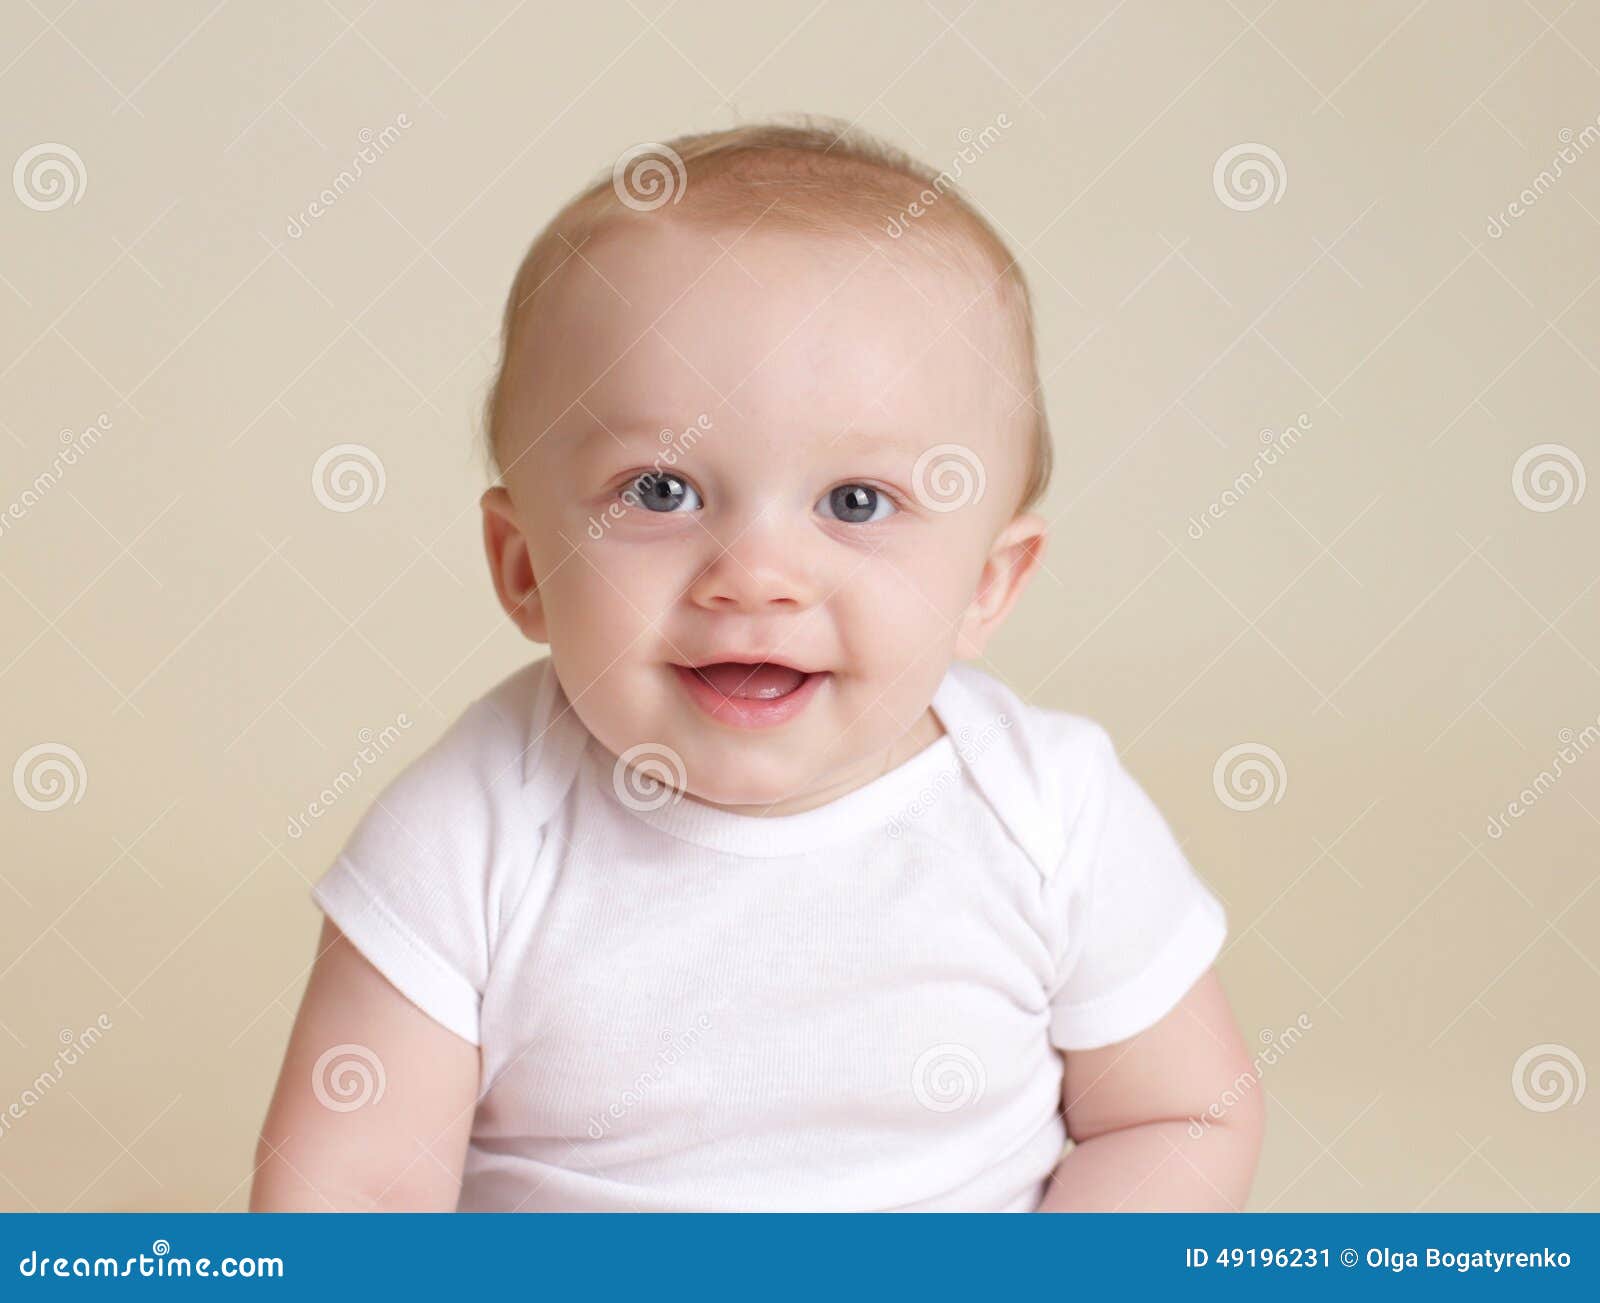 Happy Baby Smiling and Laughing Stock Image - Image of offwhite ...